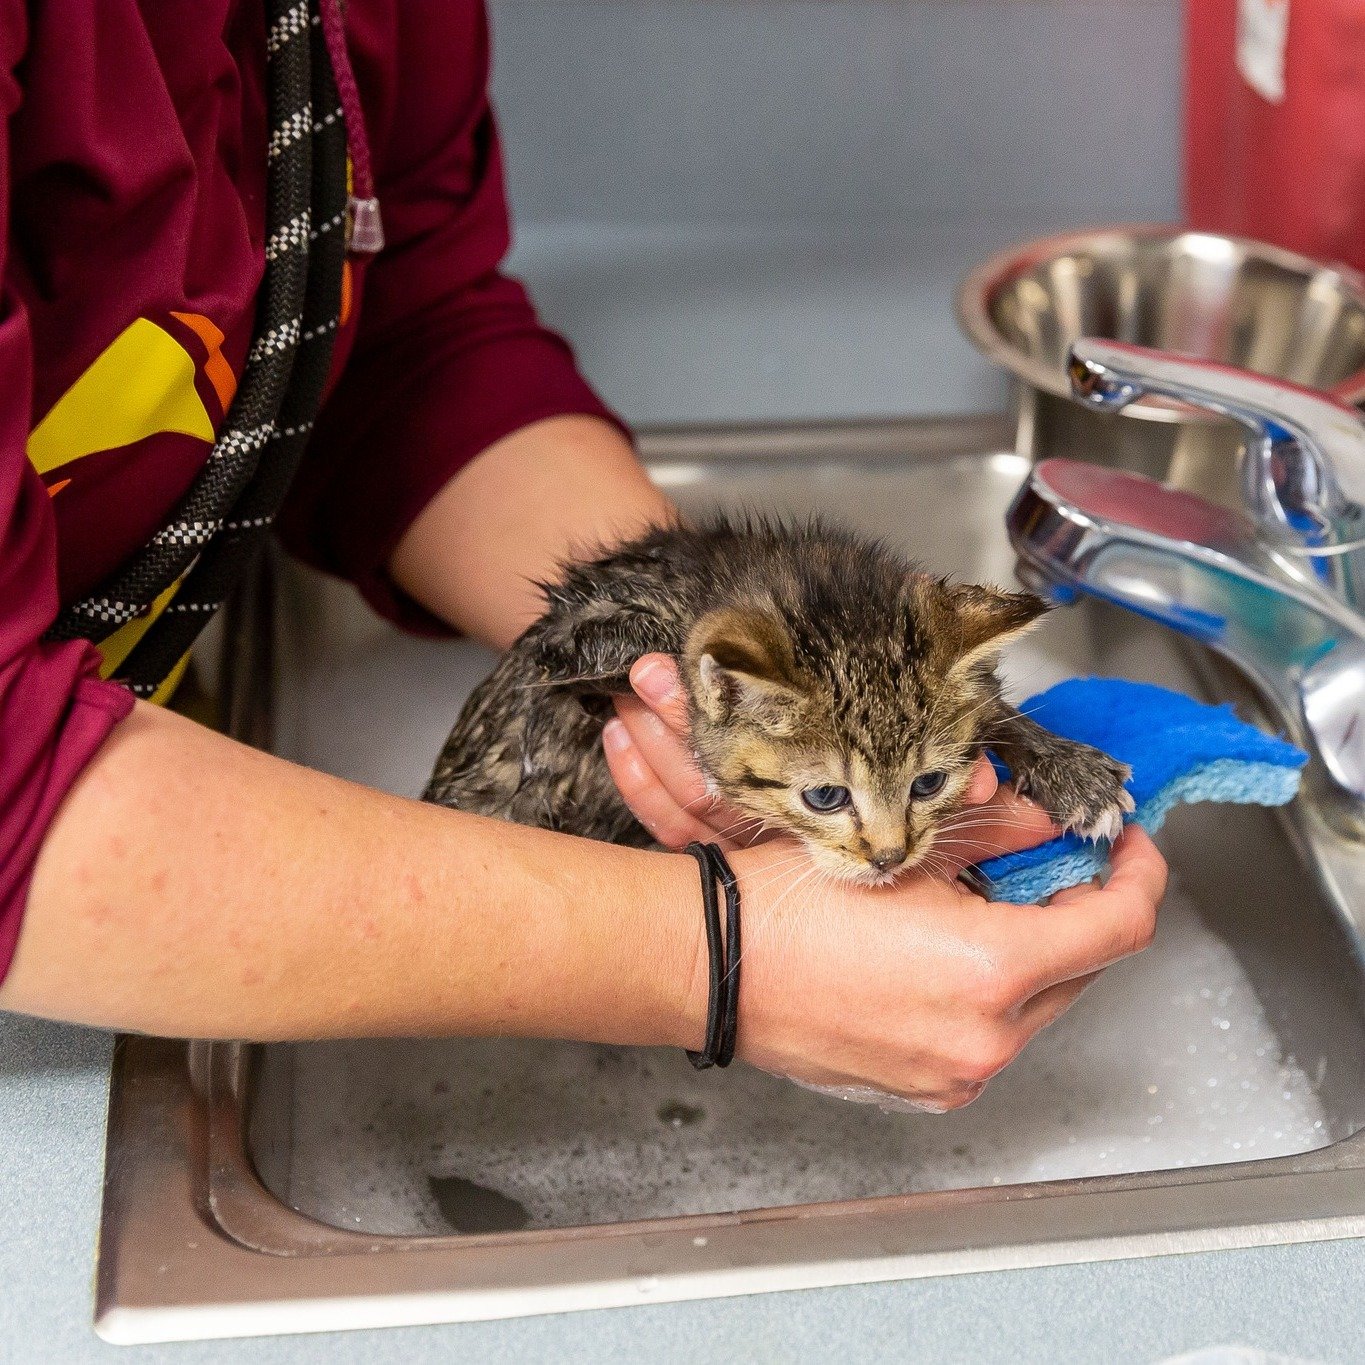 Today, as part of kitten season, our dedicated staff at BMHS worked to ensure that 4 of our youngest feline friends are ready for their journey to foster care. Each kitten received a gentle bath using P&amp;G Dawn soap, a trusted method to ensure the